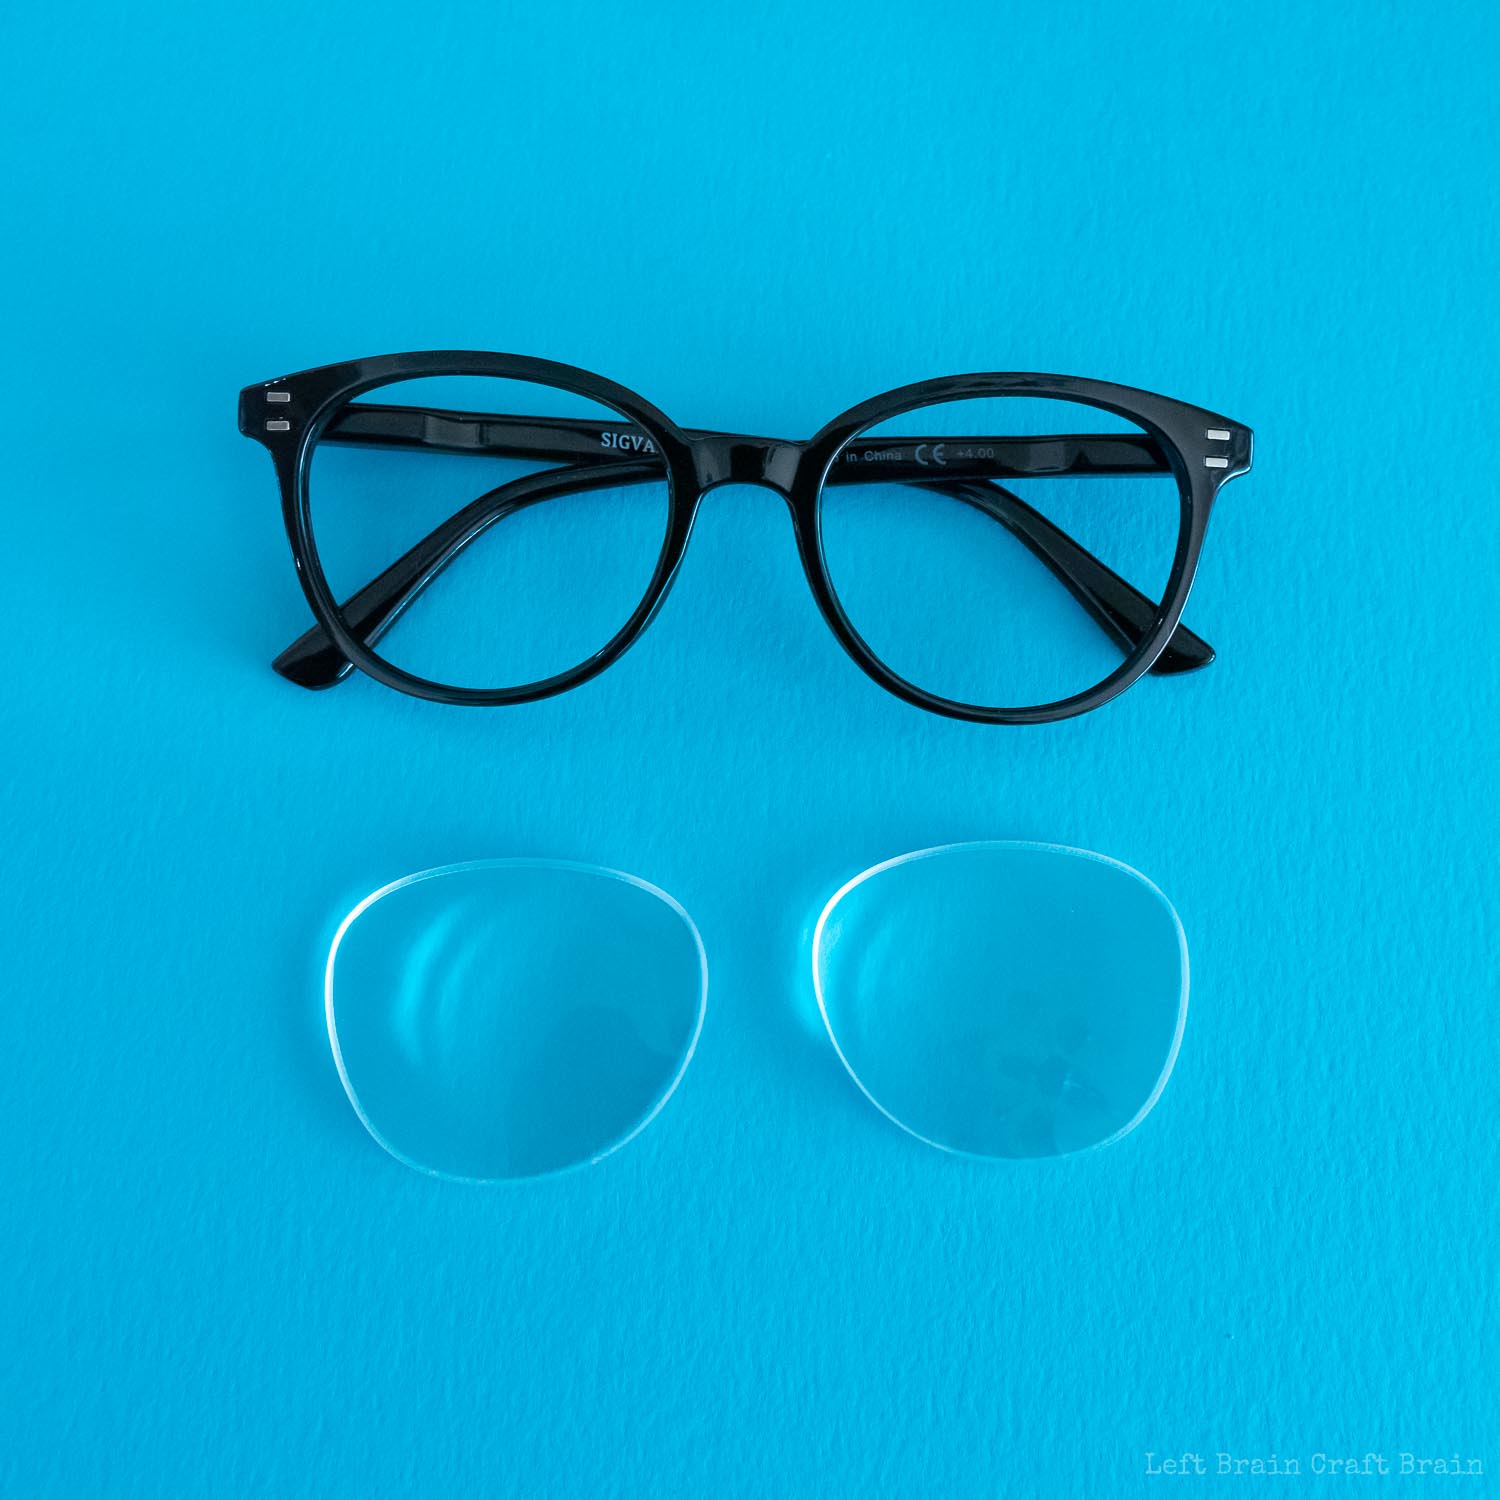 how to make a telescope - black eyeglasses on blue with lenses removed and laying underneath